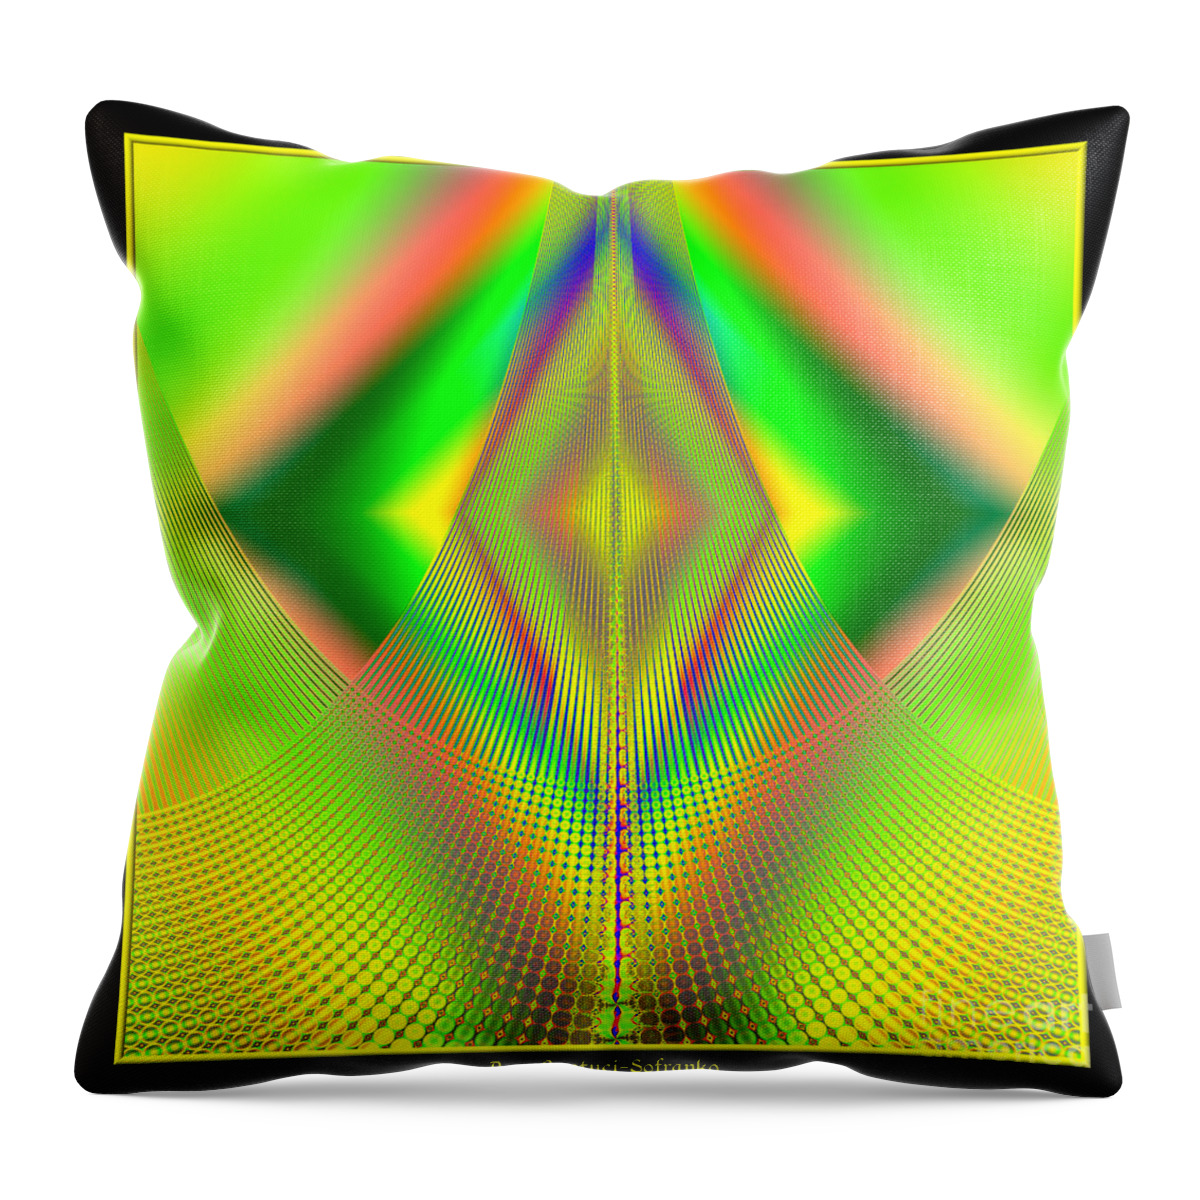 Mountains Throw Pillow featuring the digital art Fractal 32 Up Up and Away by Rose Santuci-Sofranko